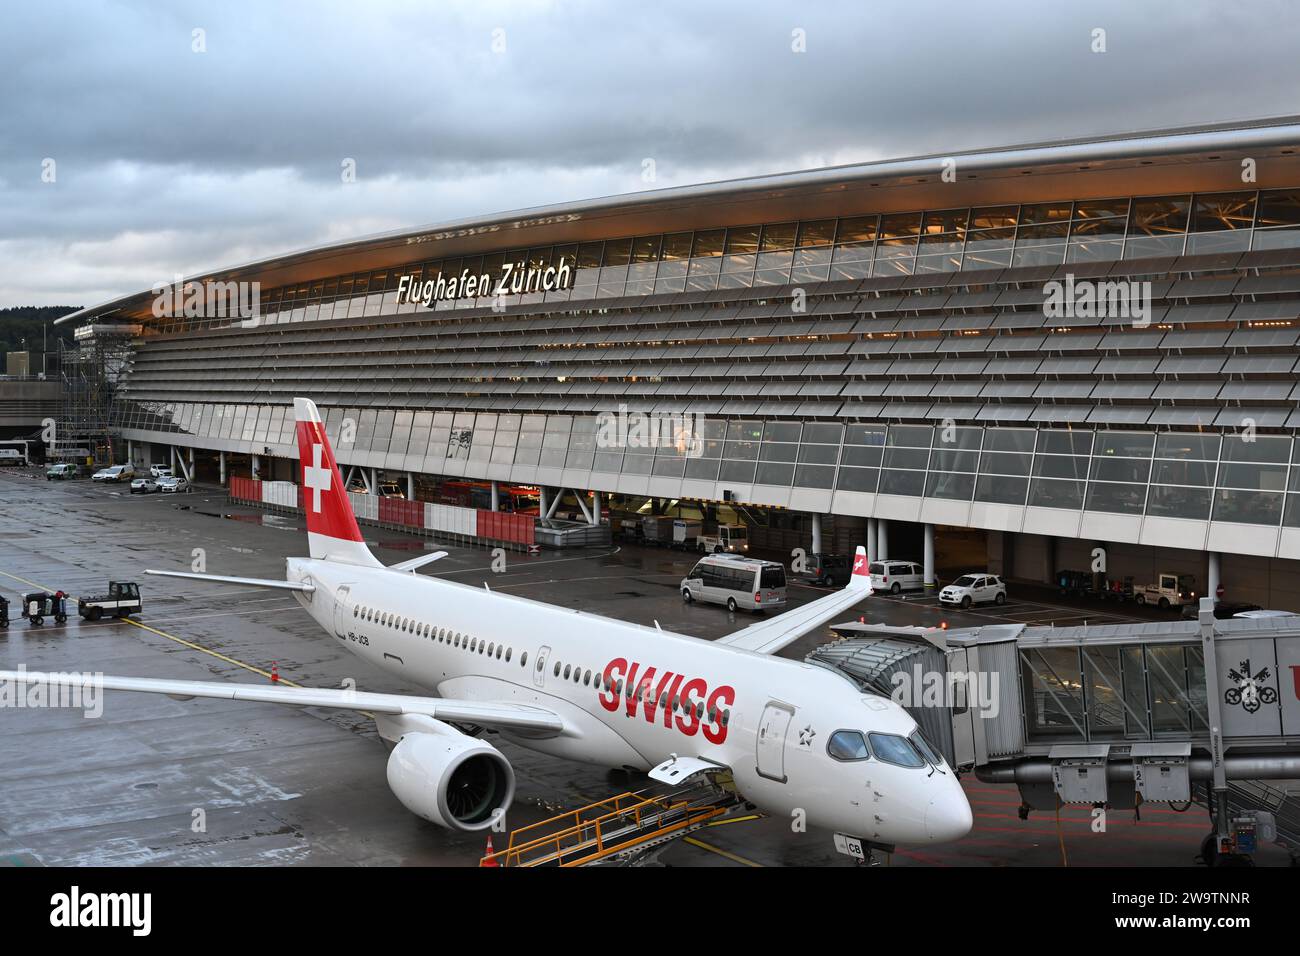 Plane from Swiss company is parked in Zurich airport. Airplane is connected to pull out arm or connector for embarking of passenger. Stock Photo